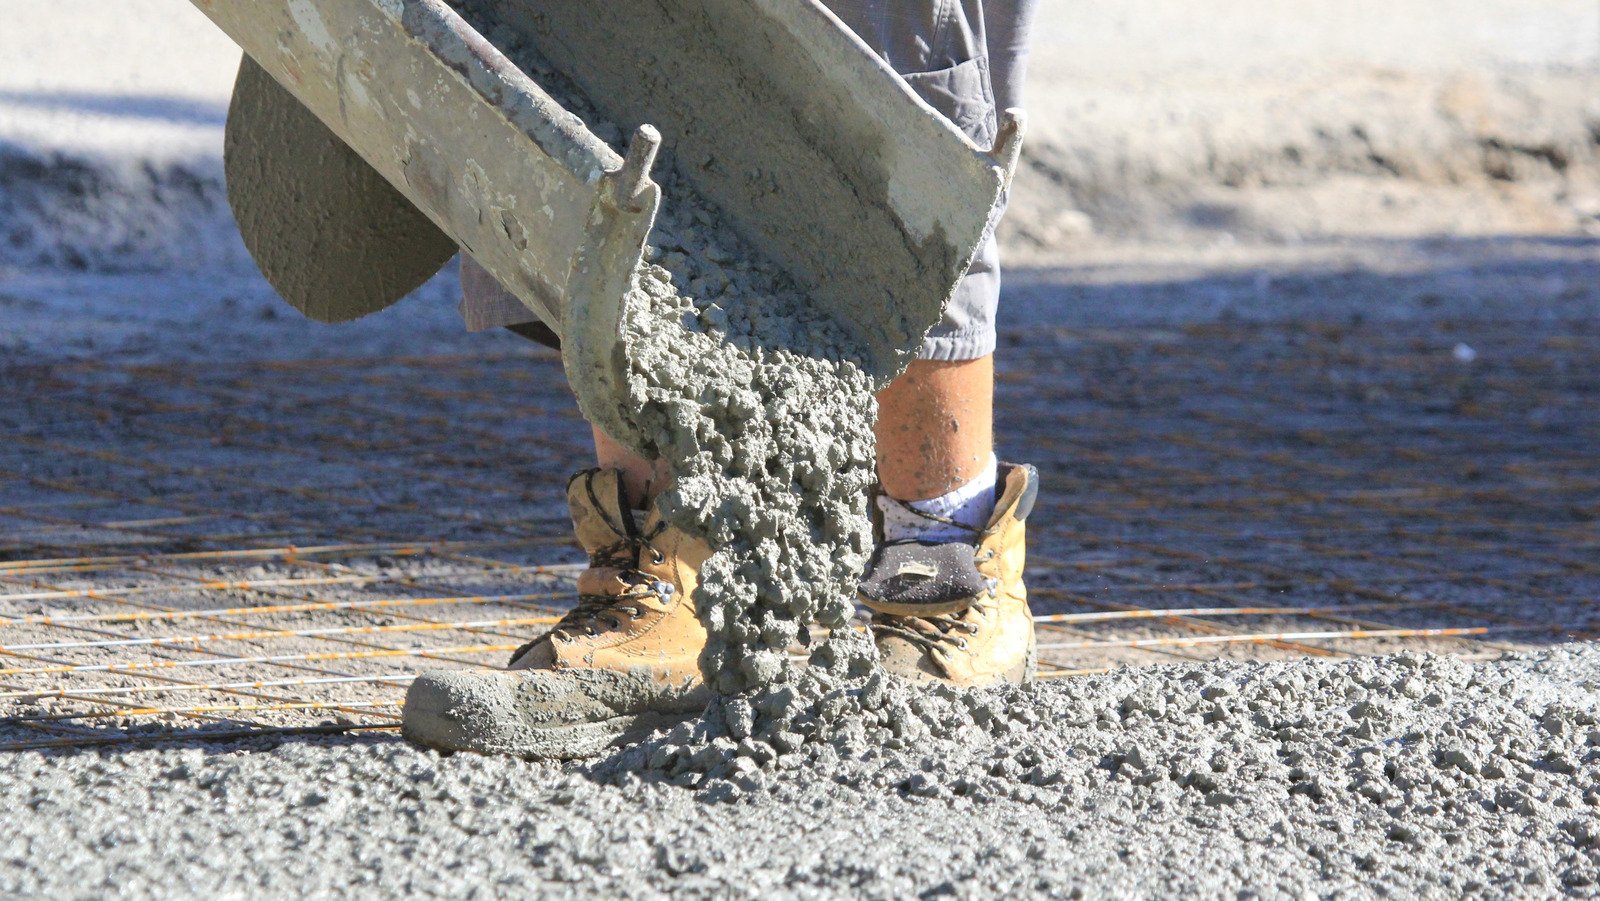 How Much Does Concrete Cost Per Yard?